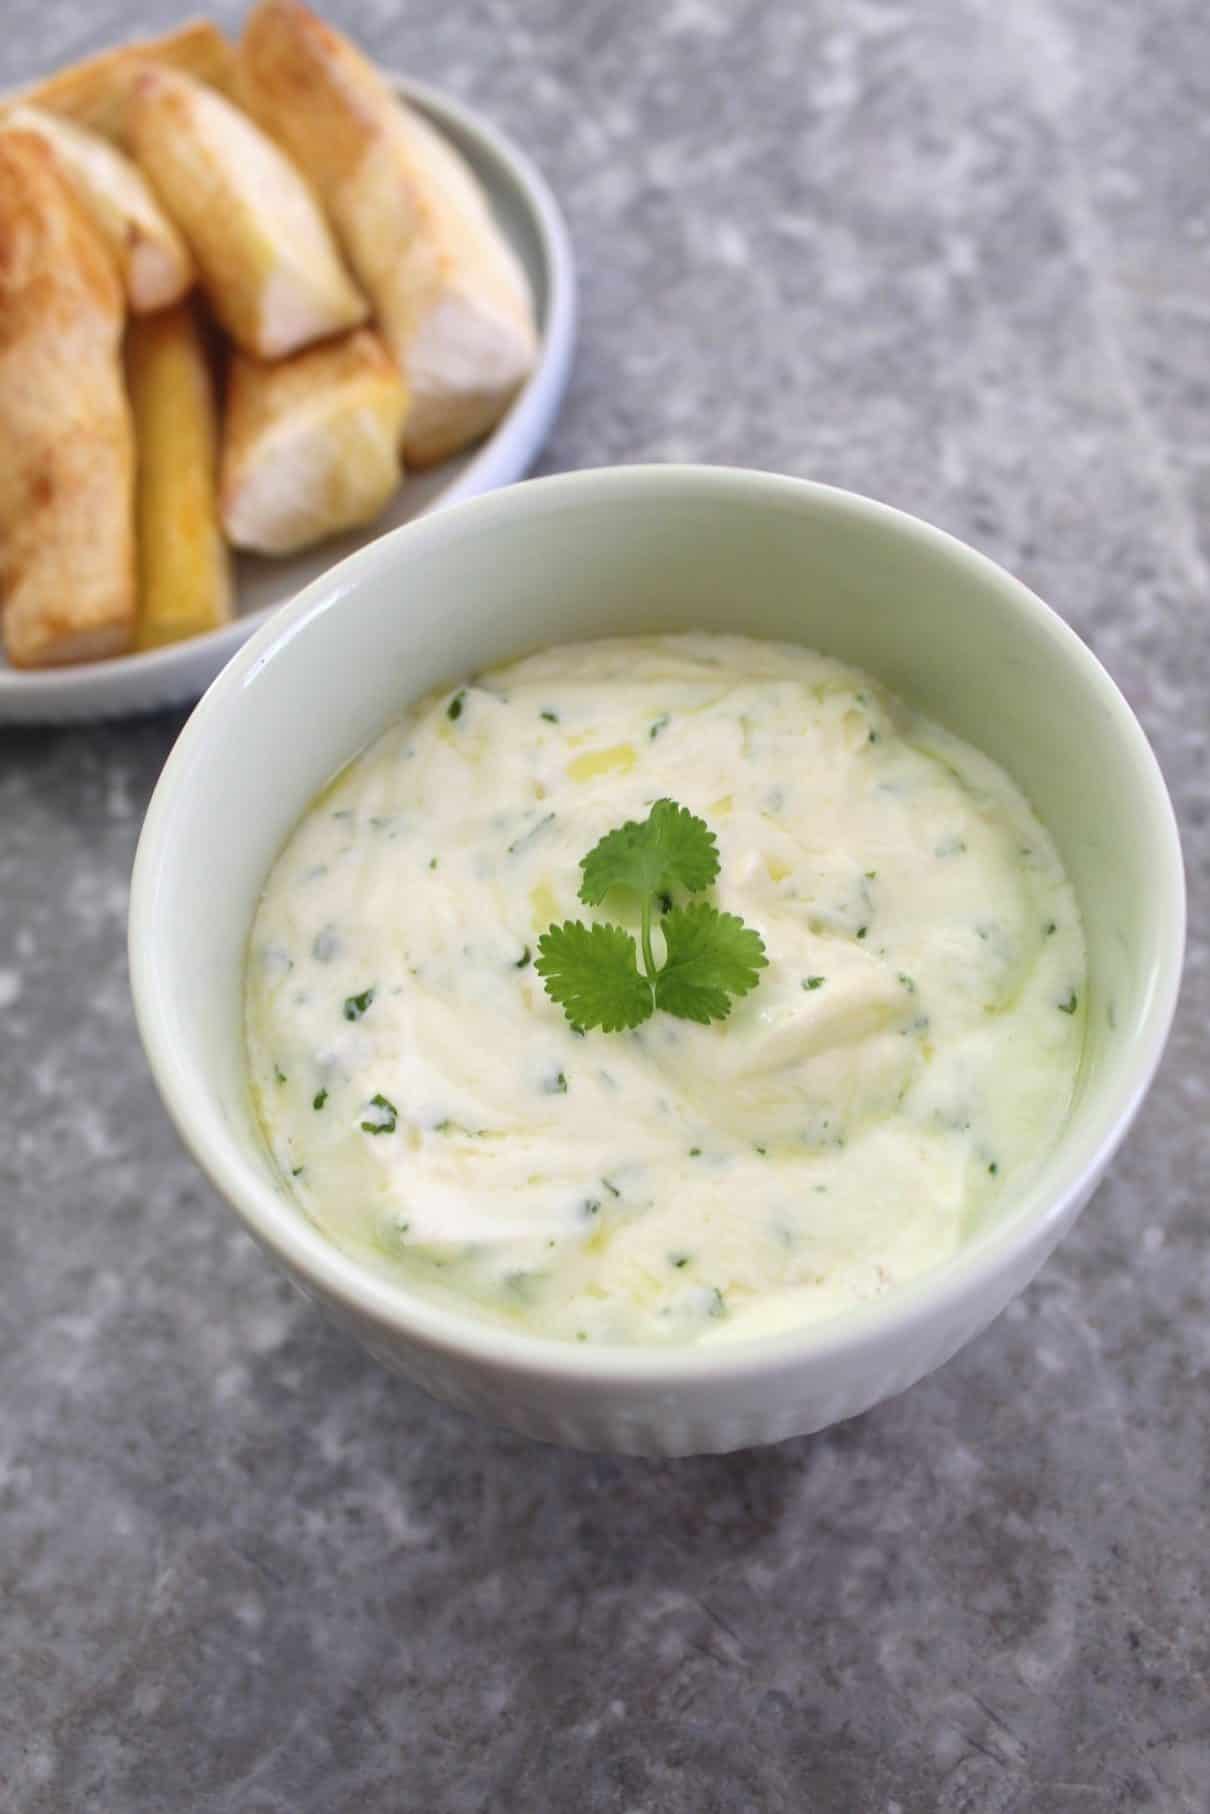 Yogurt based dip with garlic and cilantro, garnished with cilantro and shown next to a plate with fried yucca.